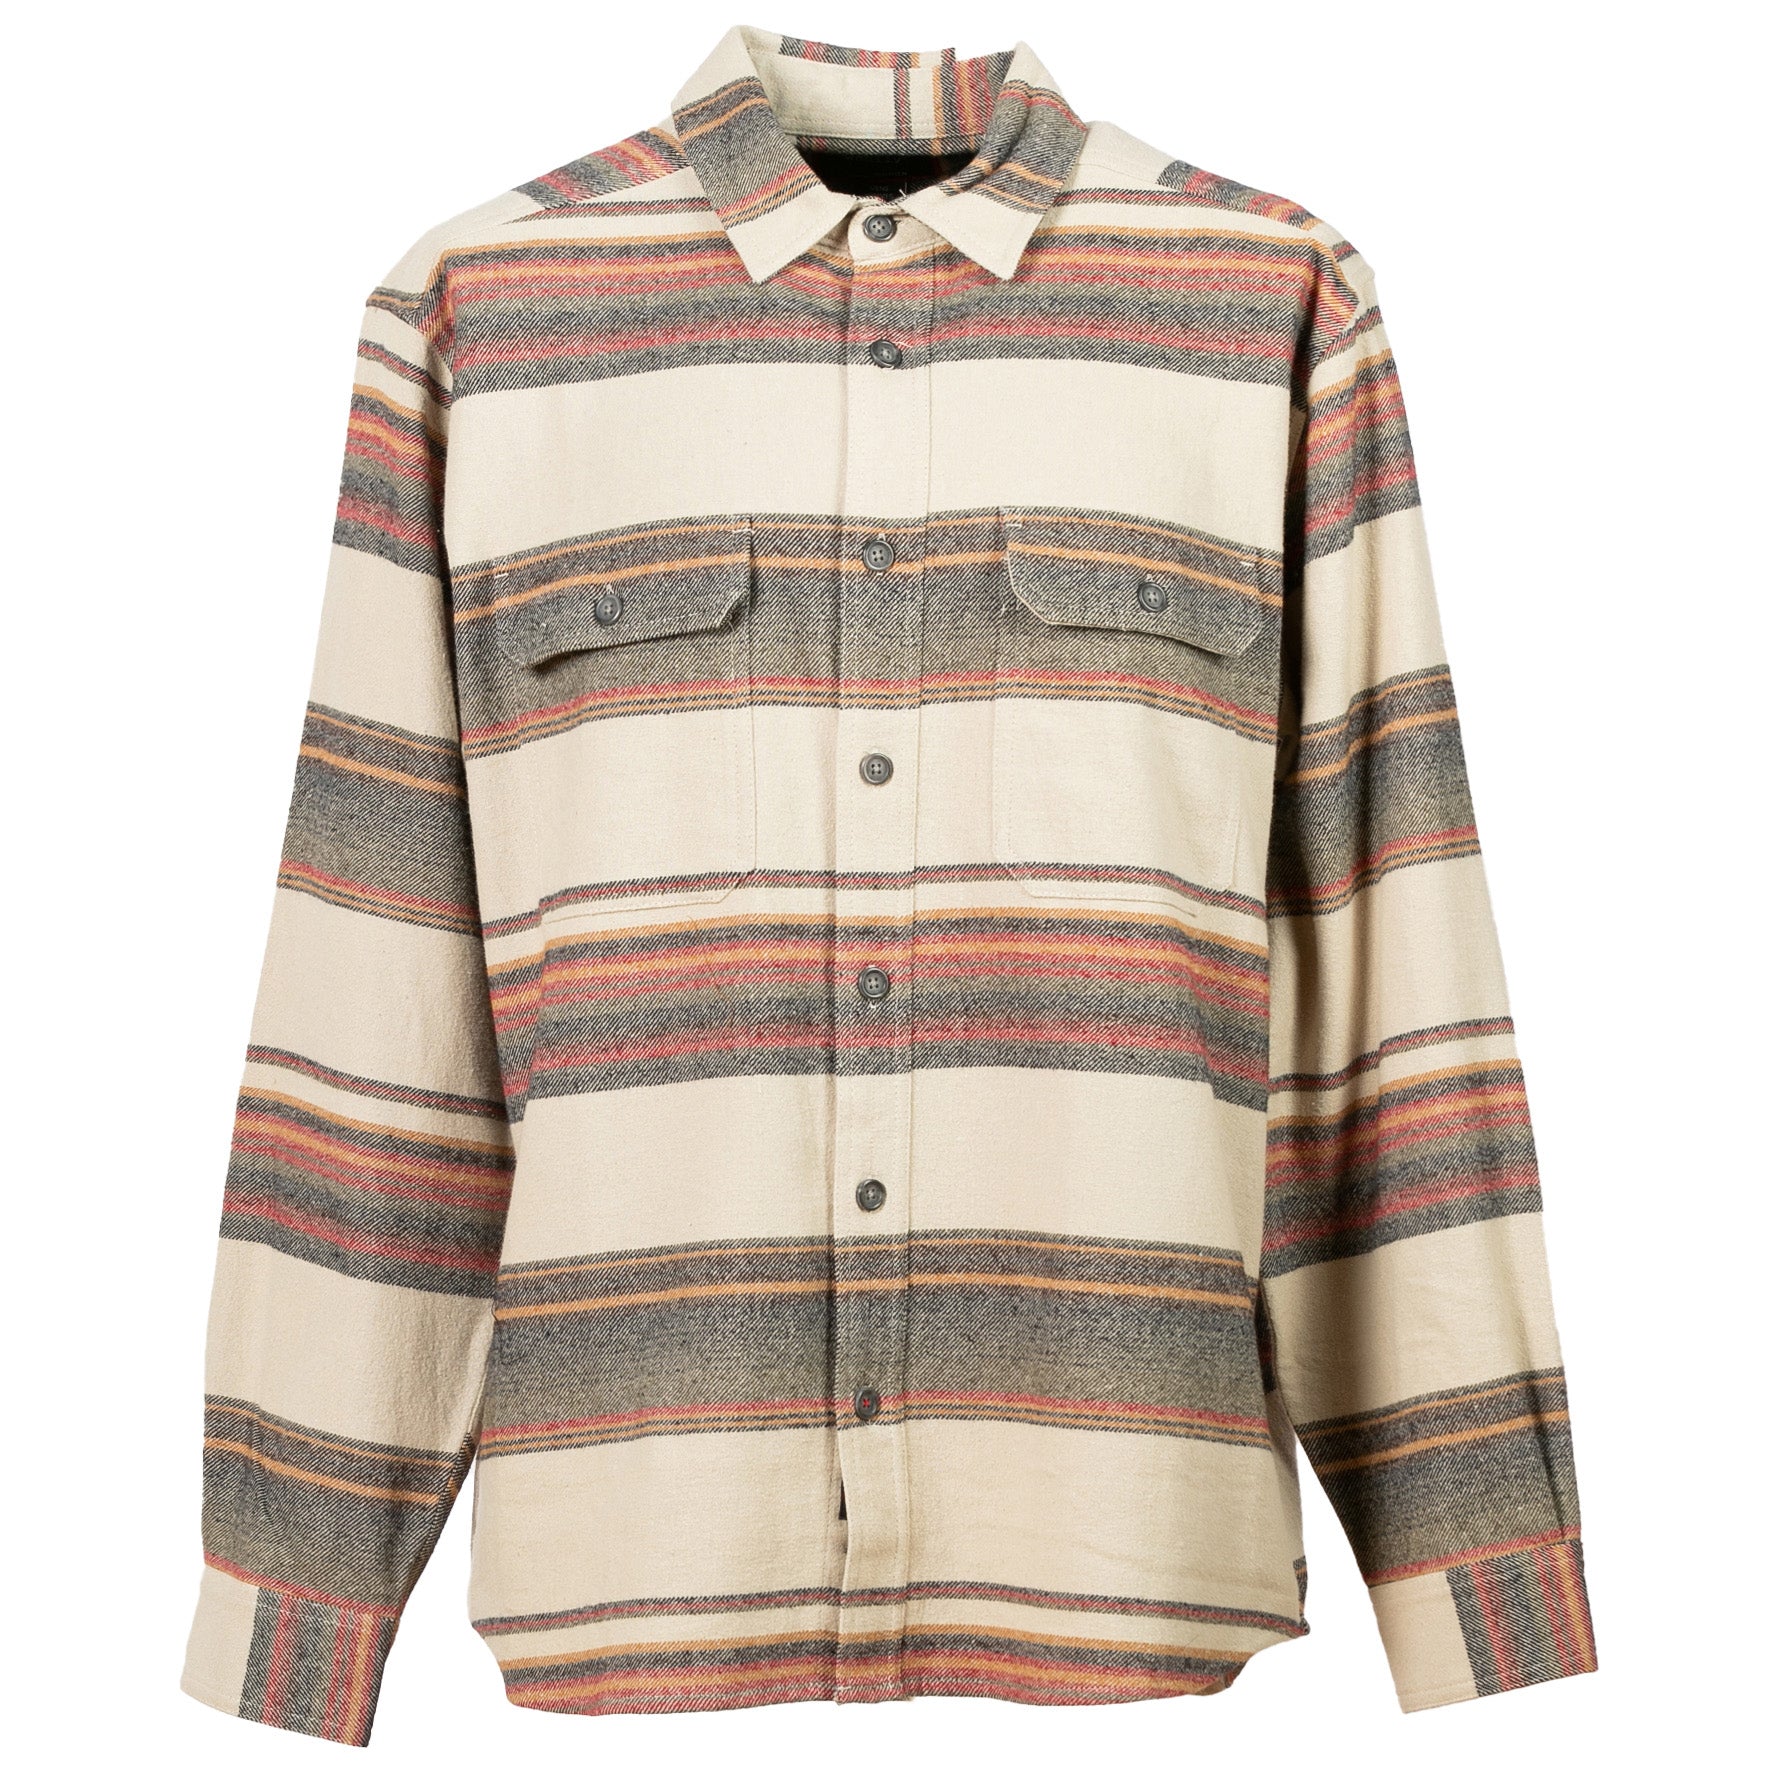 Mens Flannel Shirtjac 9 OZ | Classic Fit | Reg Woolly Dry Goods